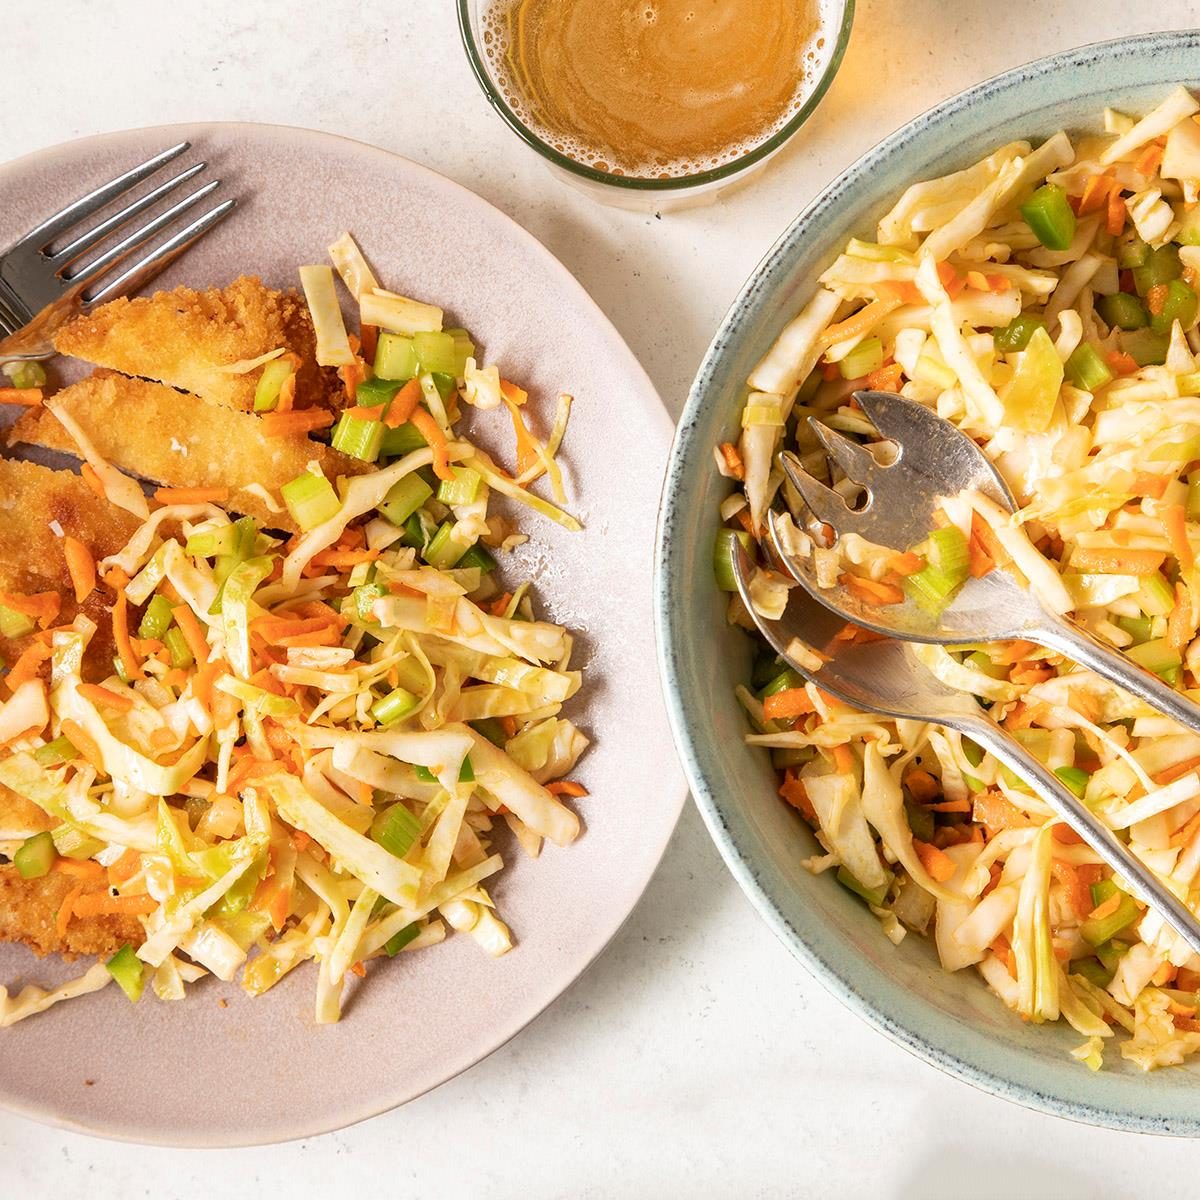 Cabbage and Rutabaga Slaw Recipe: How to Make It